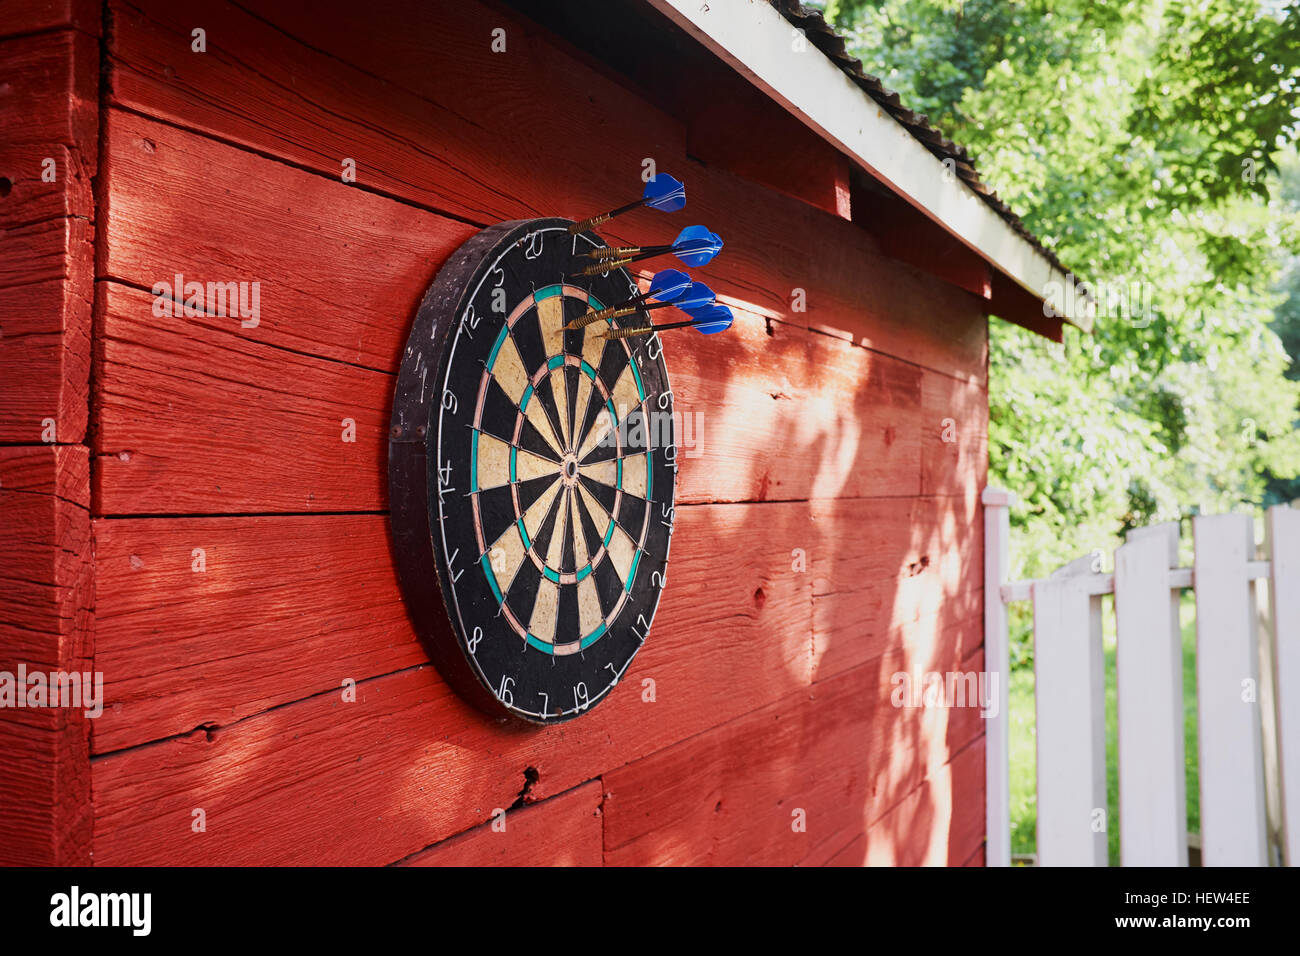 Dartboard hanging on shed, darts in board Stock Photo